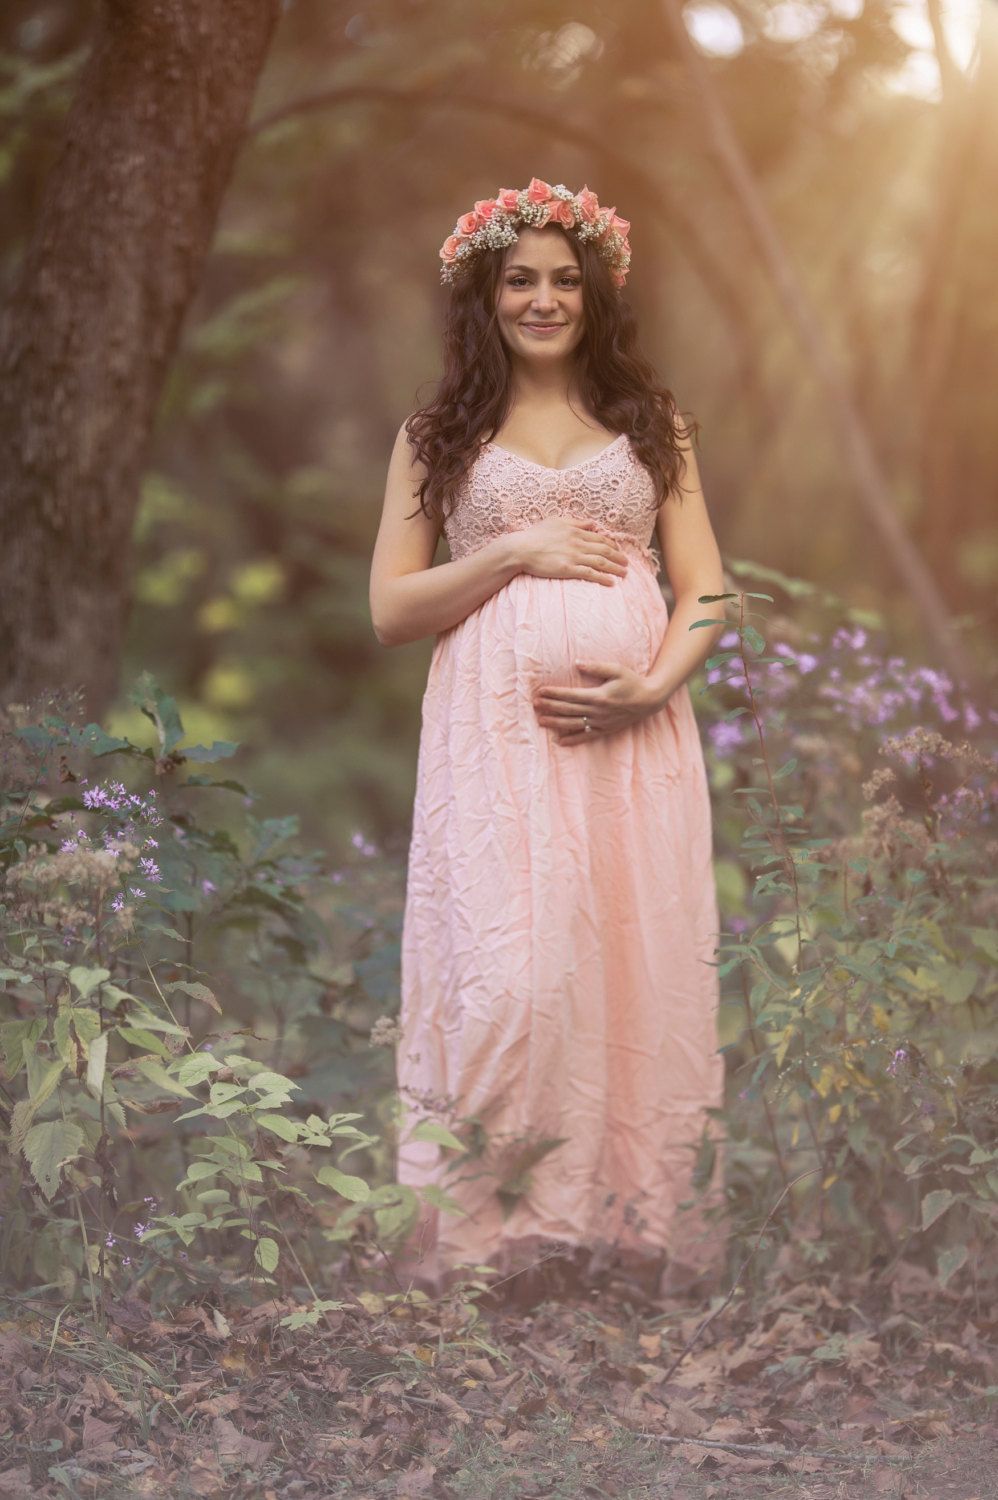 Full Size of Baby Shower:maternity Boutique Cute Maternity Dresses For Baby Shower Affordable Maternity Dresses For Baby Shower What To Wear To My Baby Shower Baby Shower Dresses For Fall Plus Size Maternity Clothes Baby Shower Attire For Mom Maternity Gowns For Photography